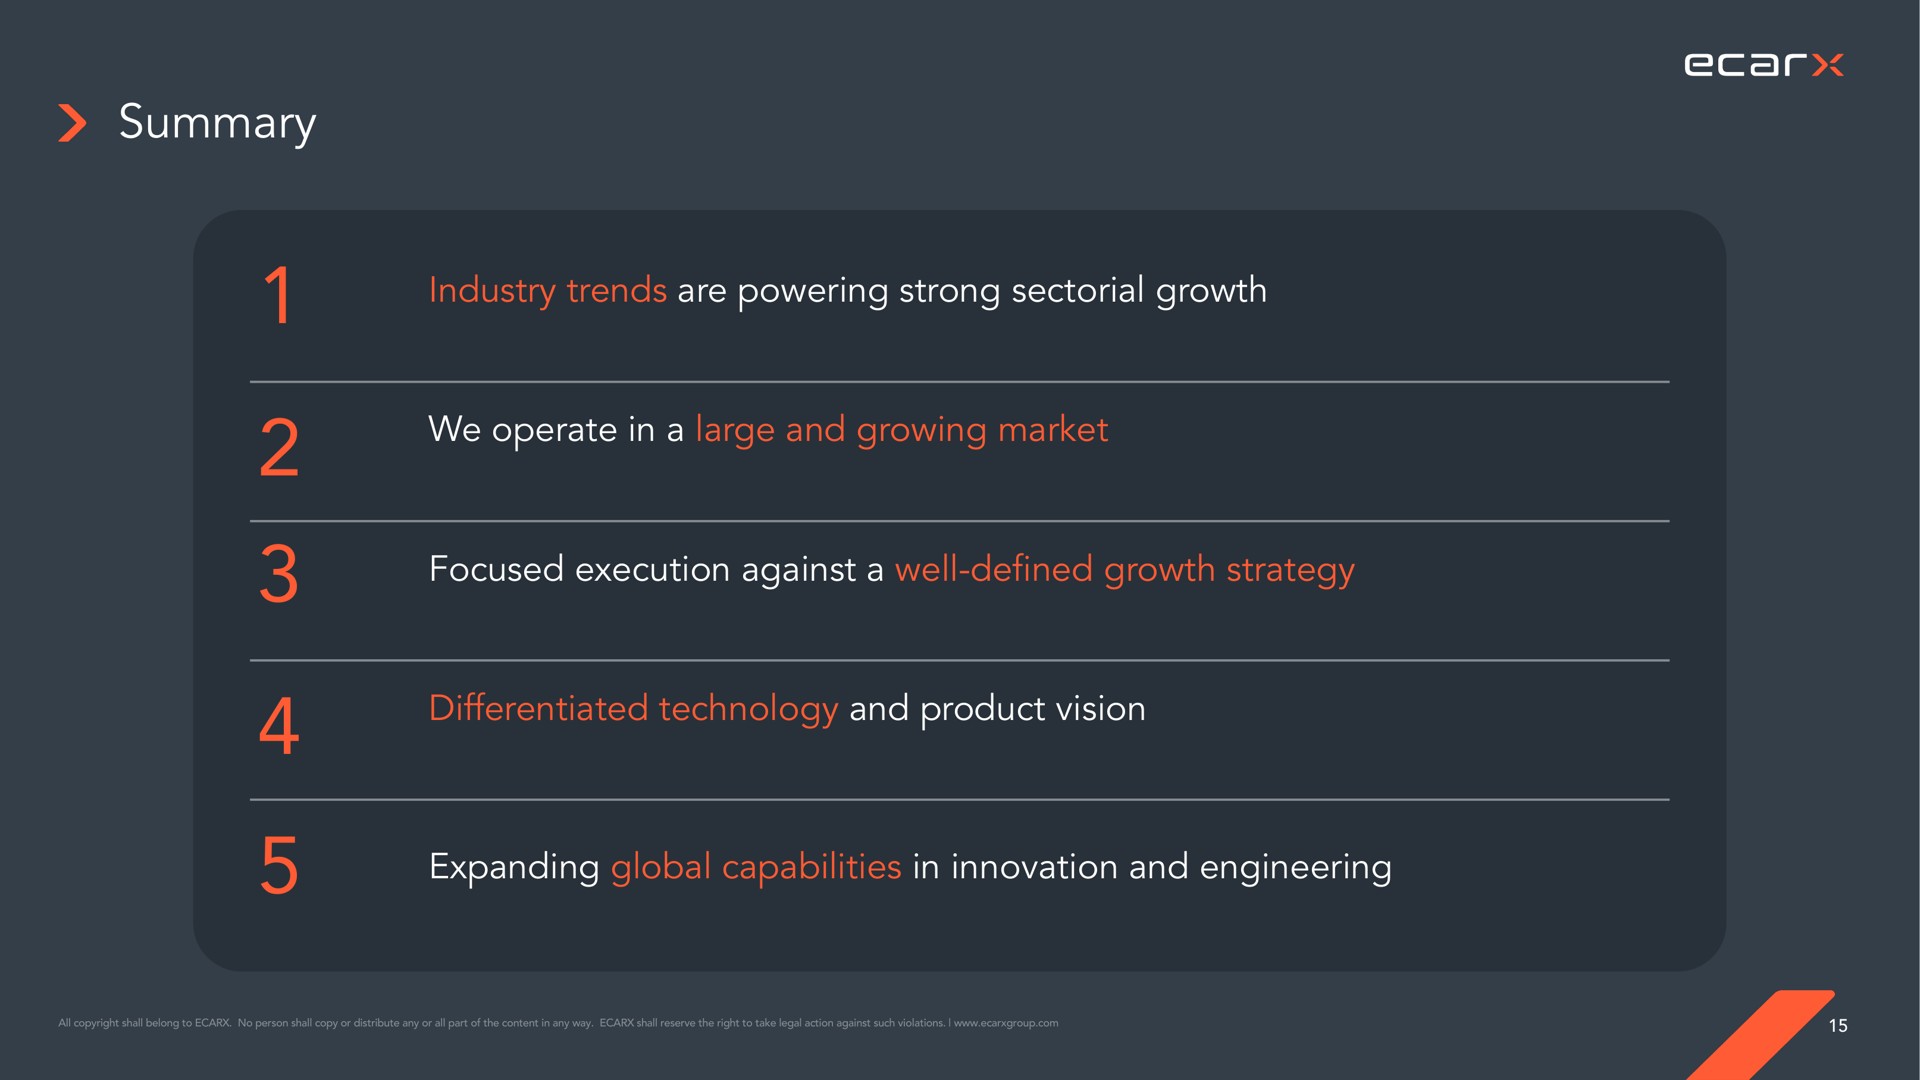 summary industry trends are powering strong sectorial growth we operate in a large and growing market focused execution against a well defined growth strategy differentiated technology and product vision expanding global capabilities in innovation and engineering peso lenient a | Ecarx